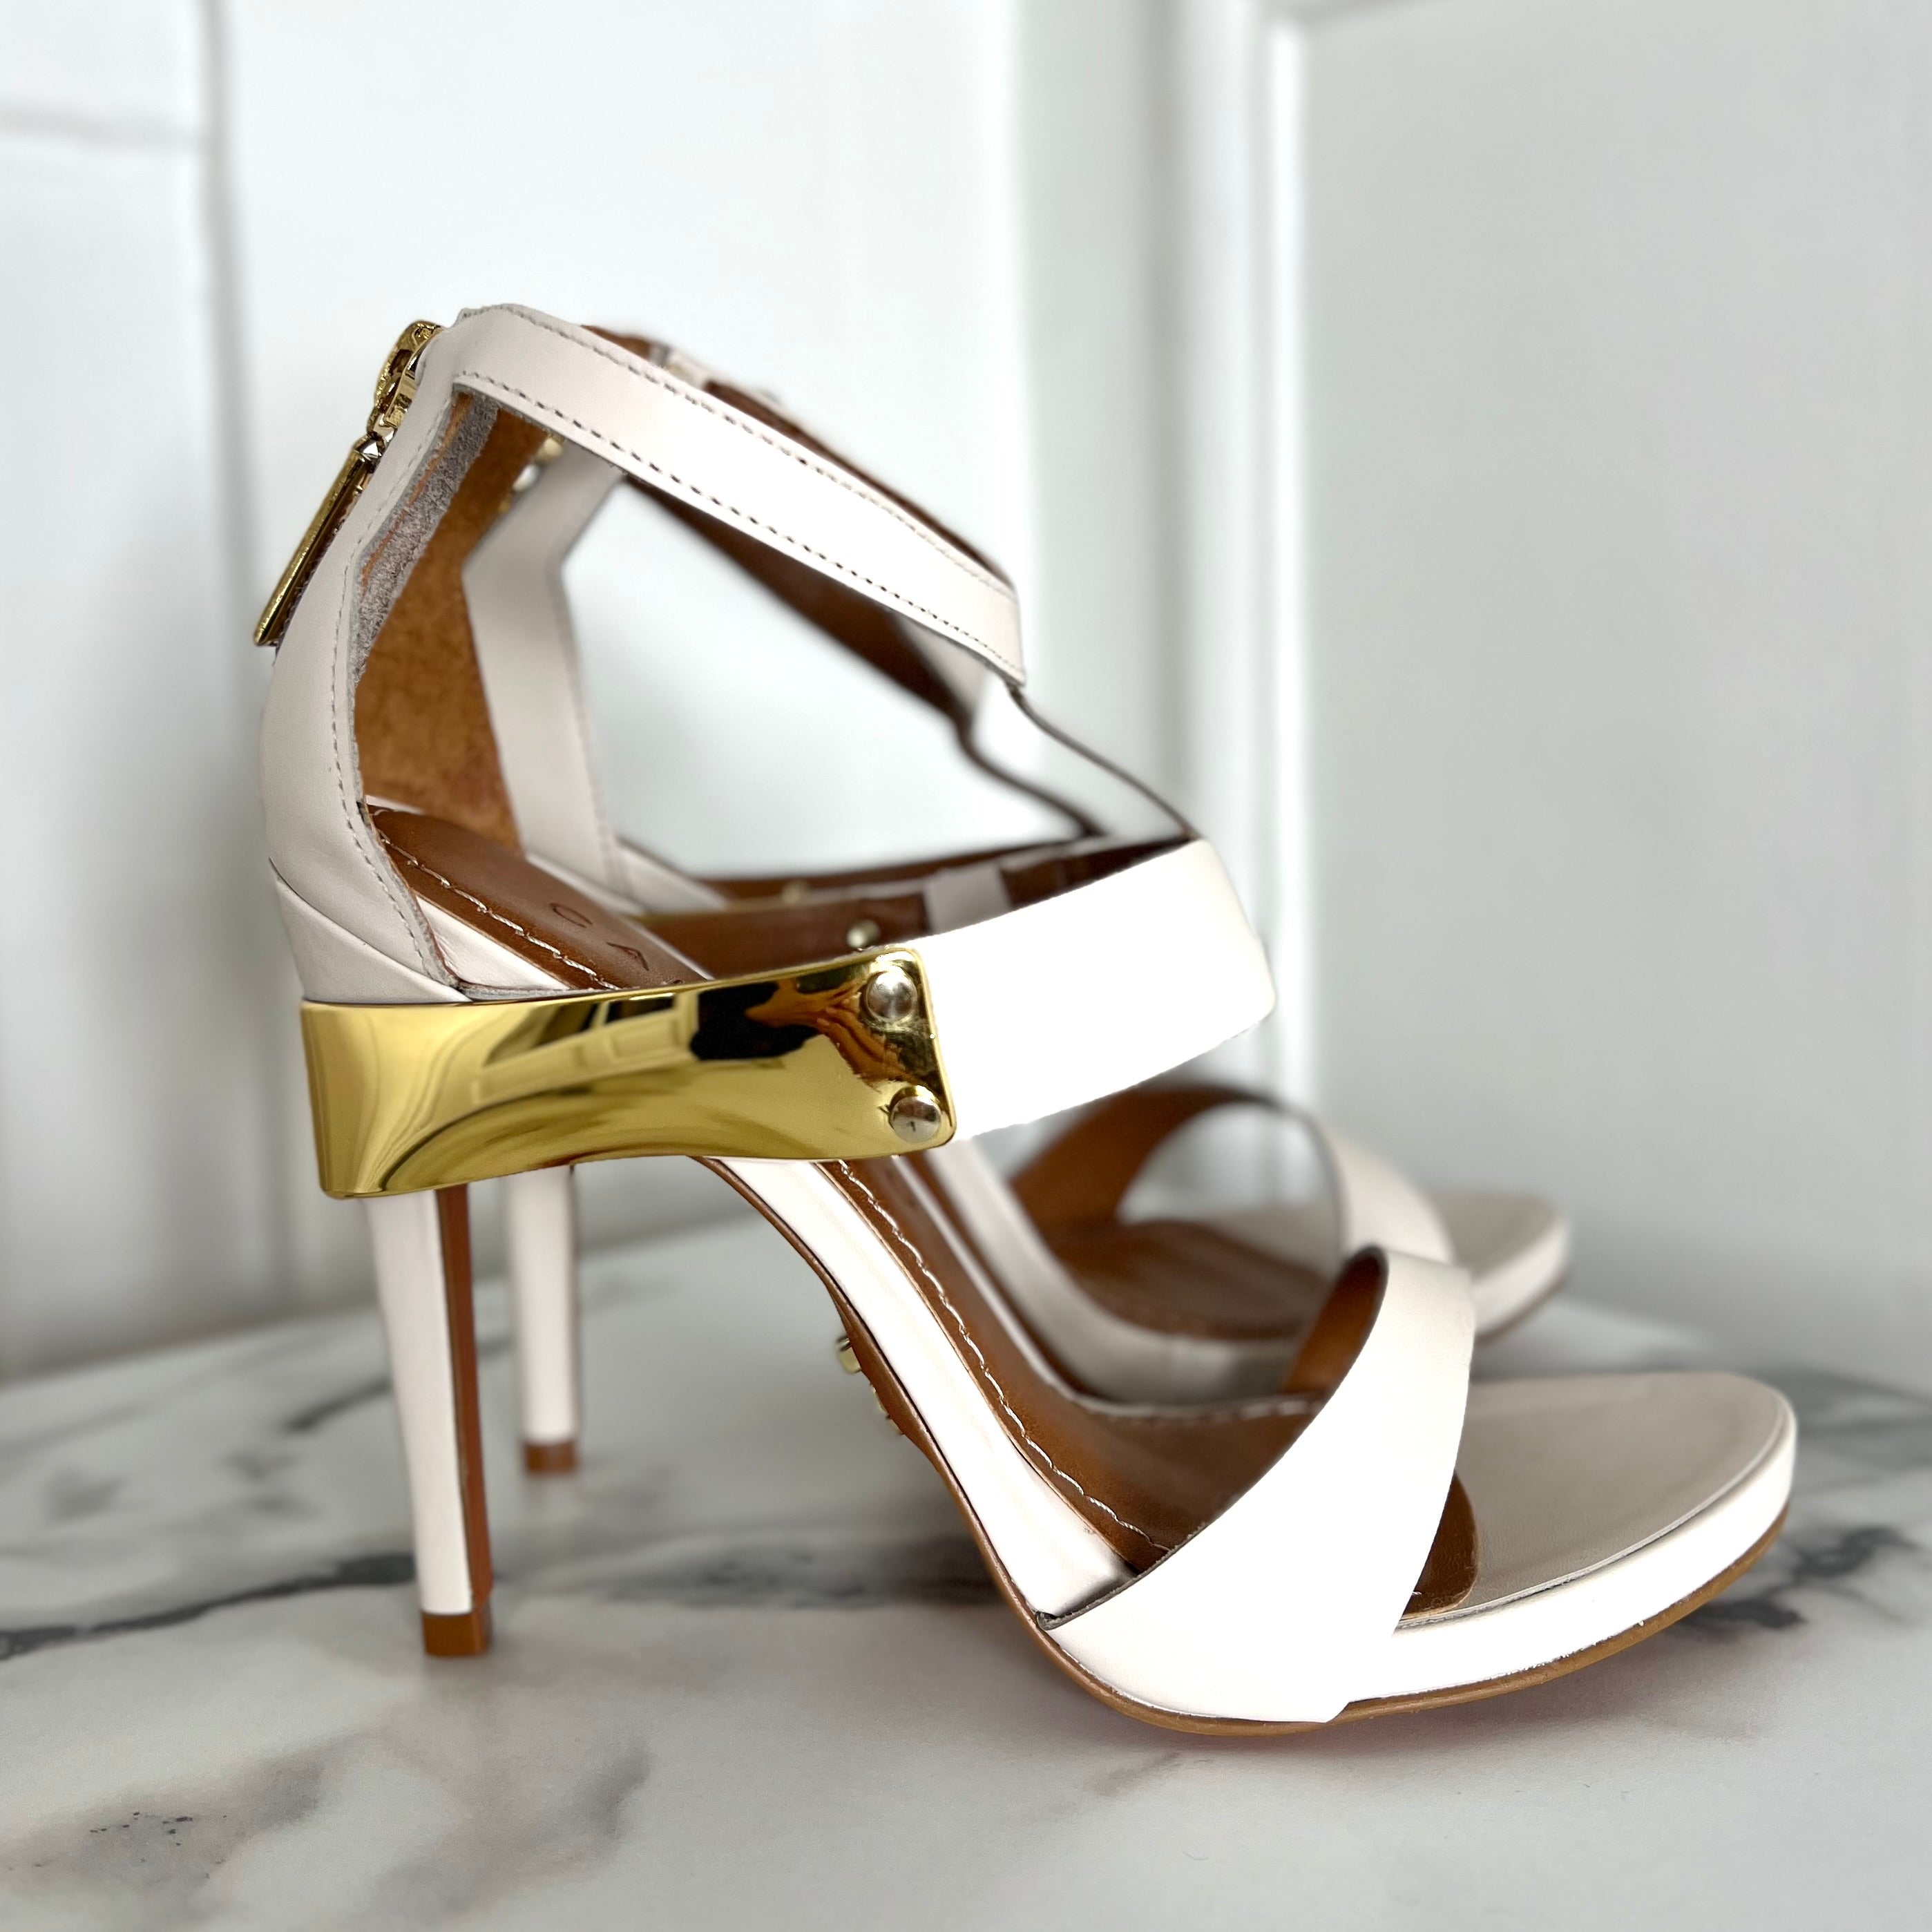 Statement High Heels Leather Sandals in Cream and Gold